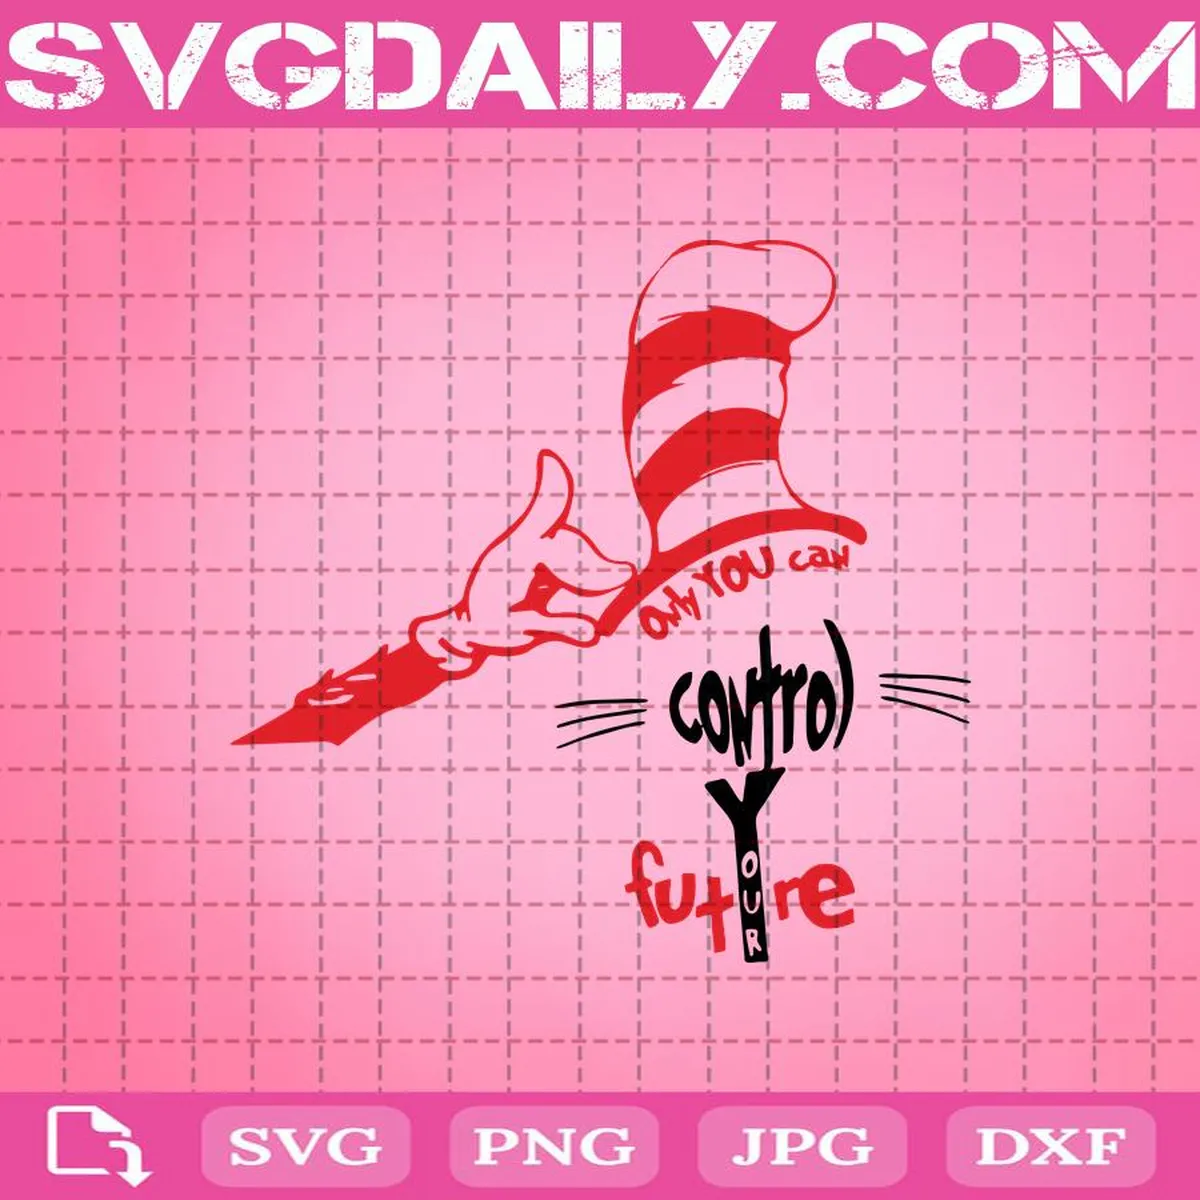 Only You Can Control Future Svg, Dr Seuss Svg, Cat In Hat Svg, Thelorax Svg, Dr Seuss Quotes Svg, Lorax Svg